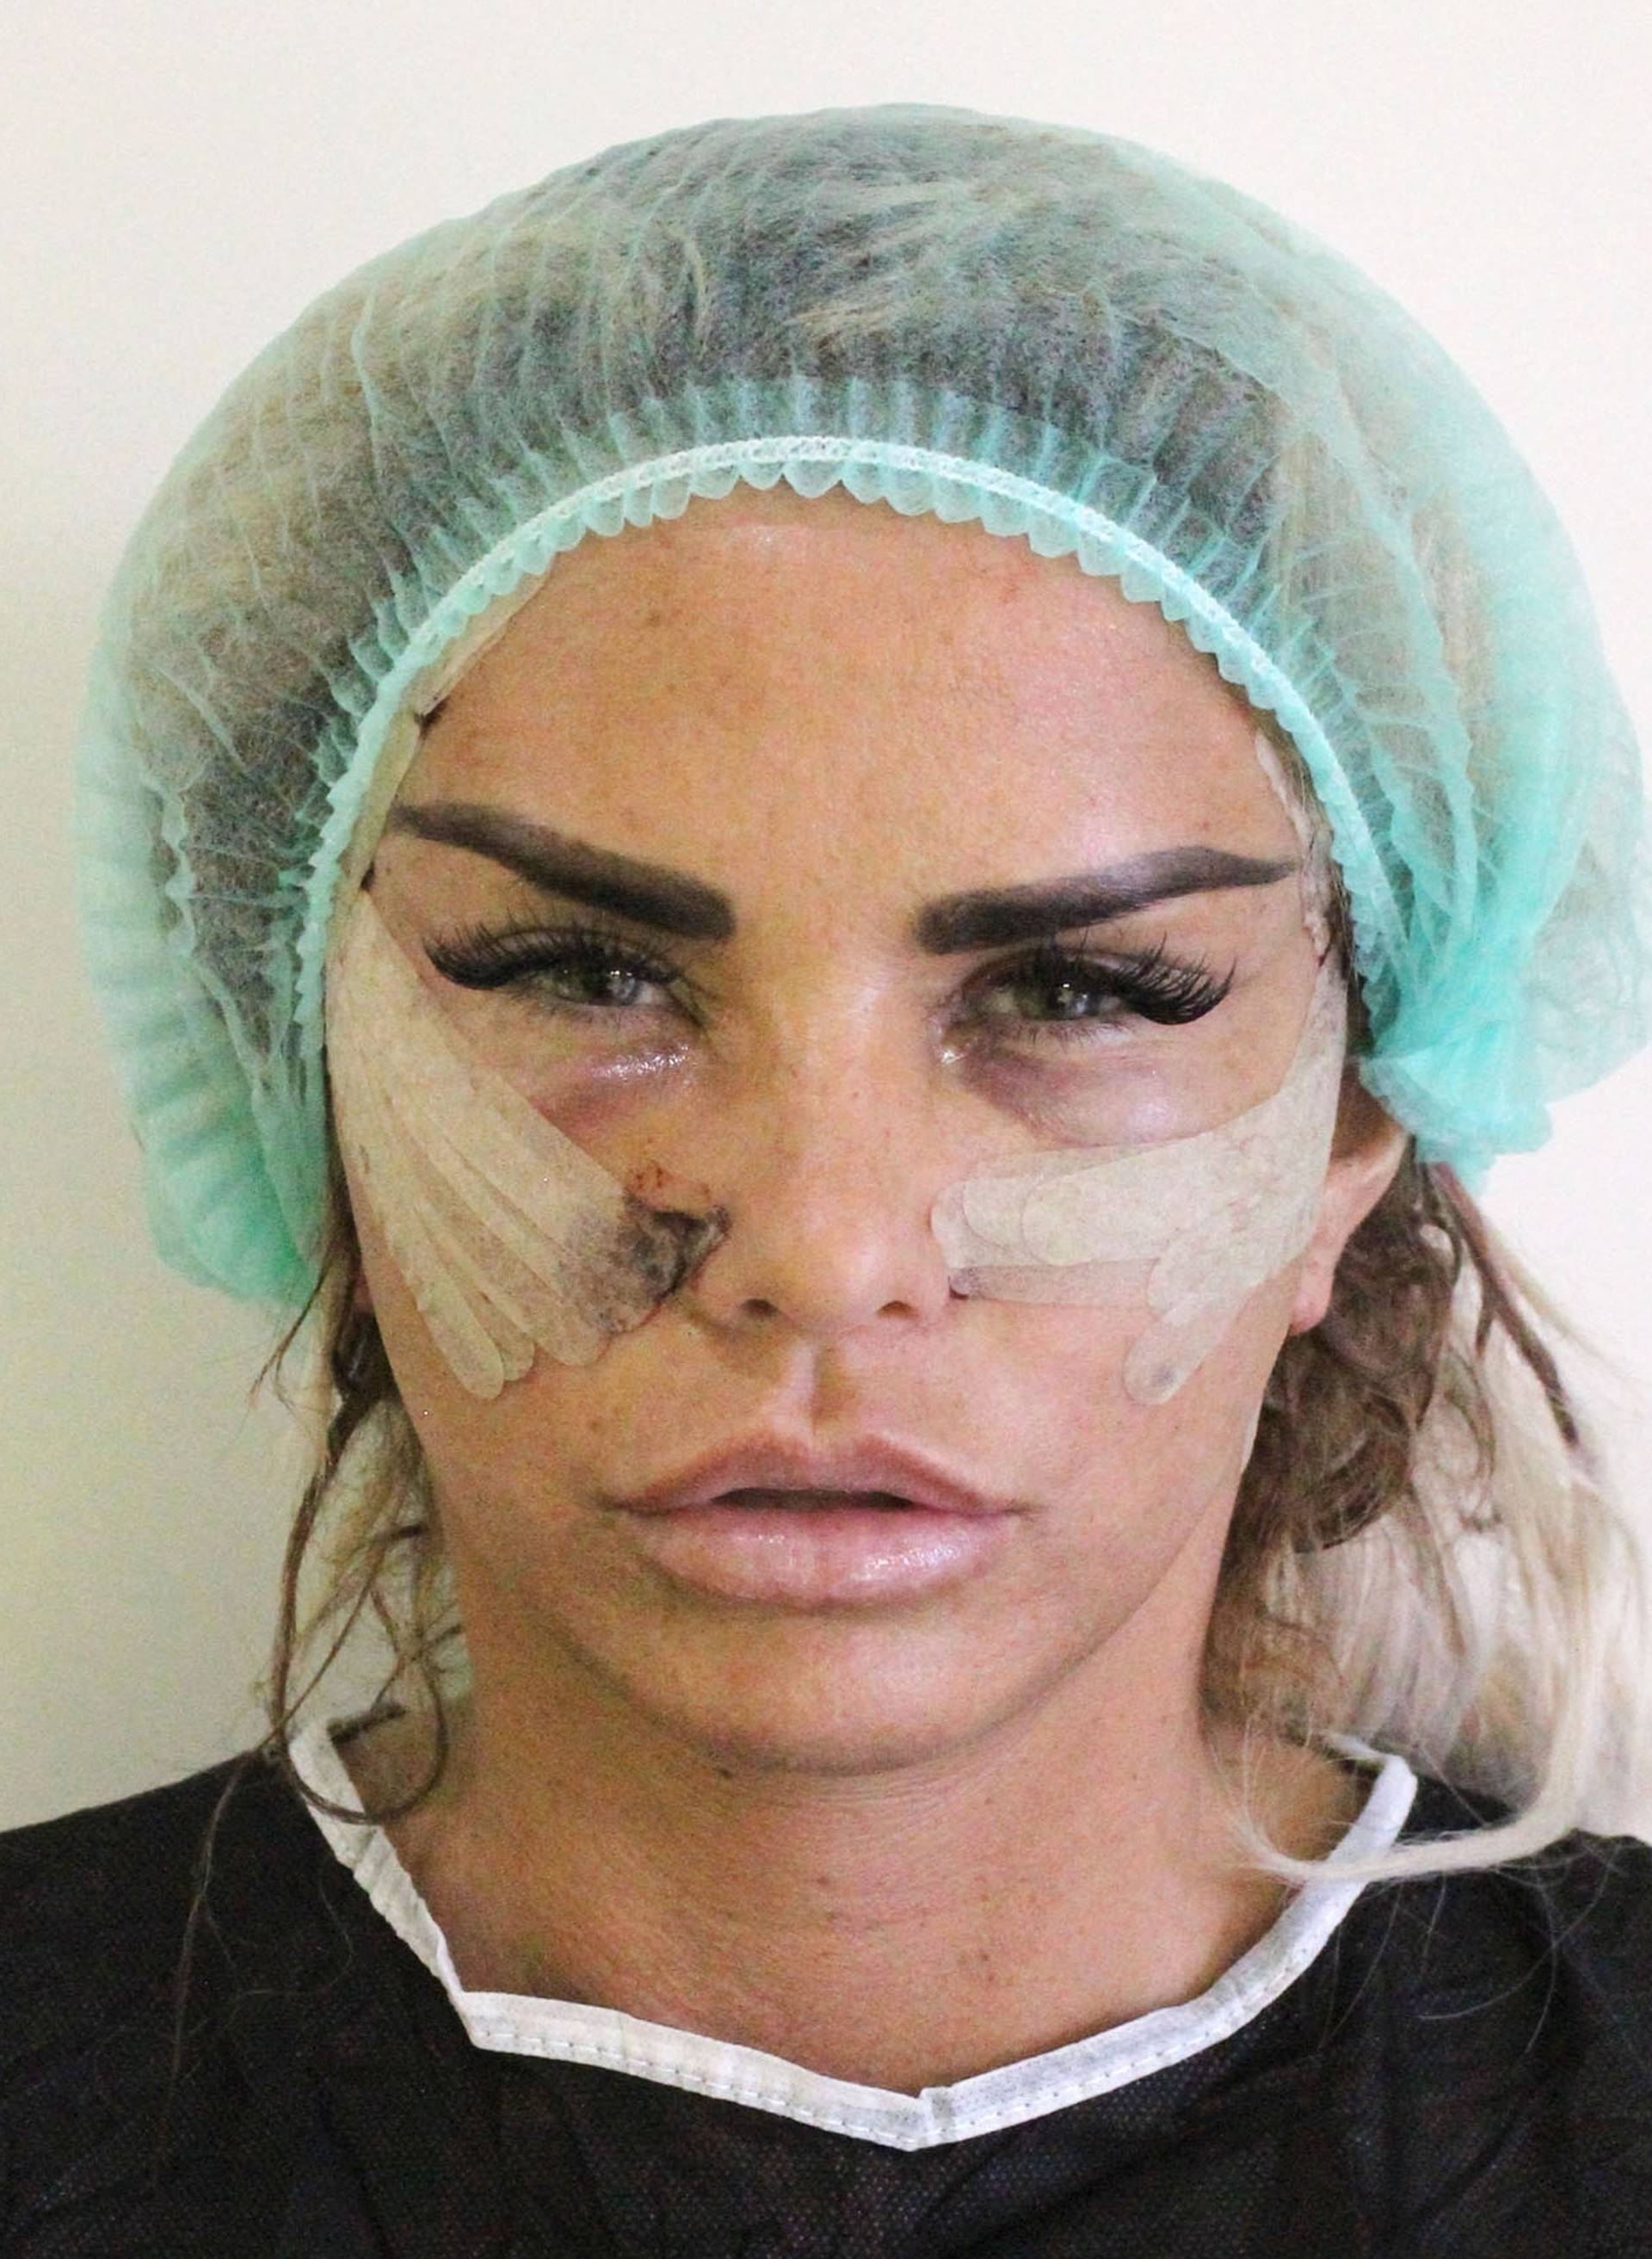 *PREMIUM-EXCLUSIVE* Former Glamour Model Katie Price Aka Jordan goes under the knife as she's pictured looking in discomfort after having surgery done in Turkey. *MUST CALL FOR PRICING*